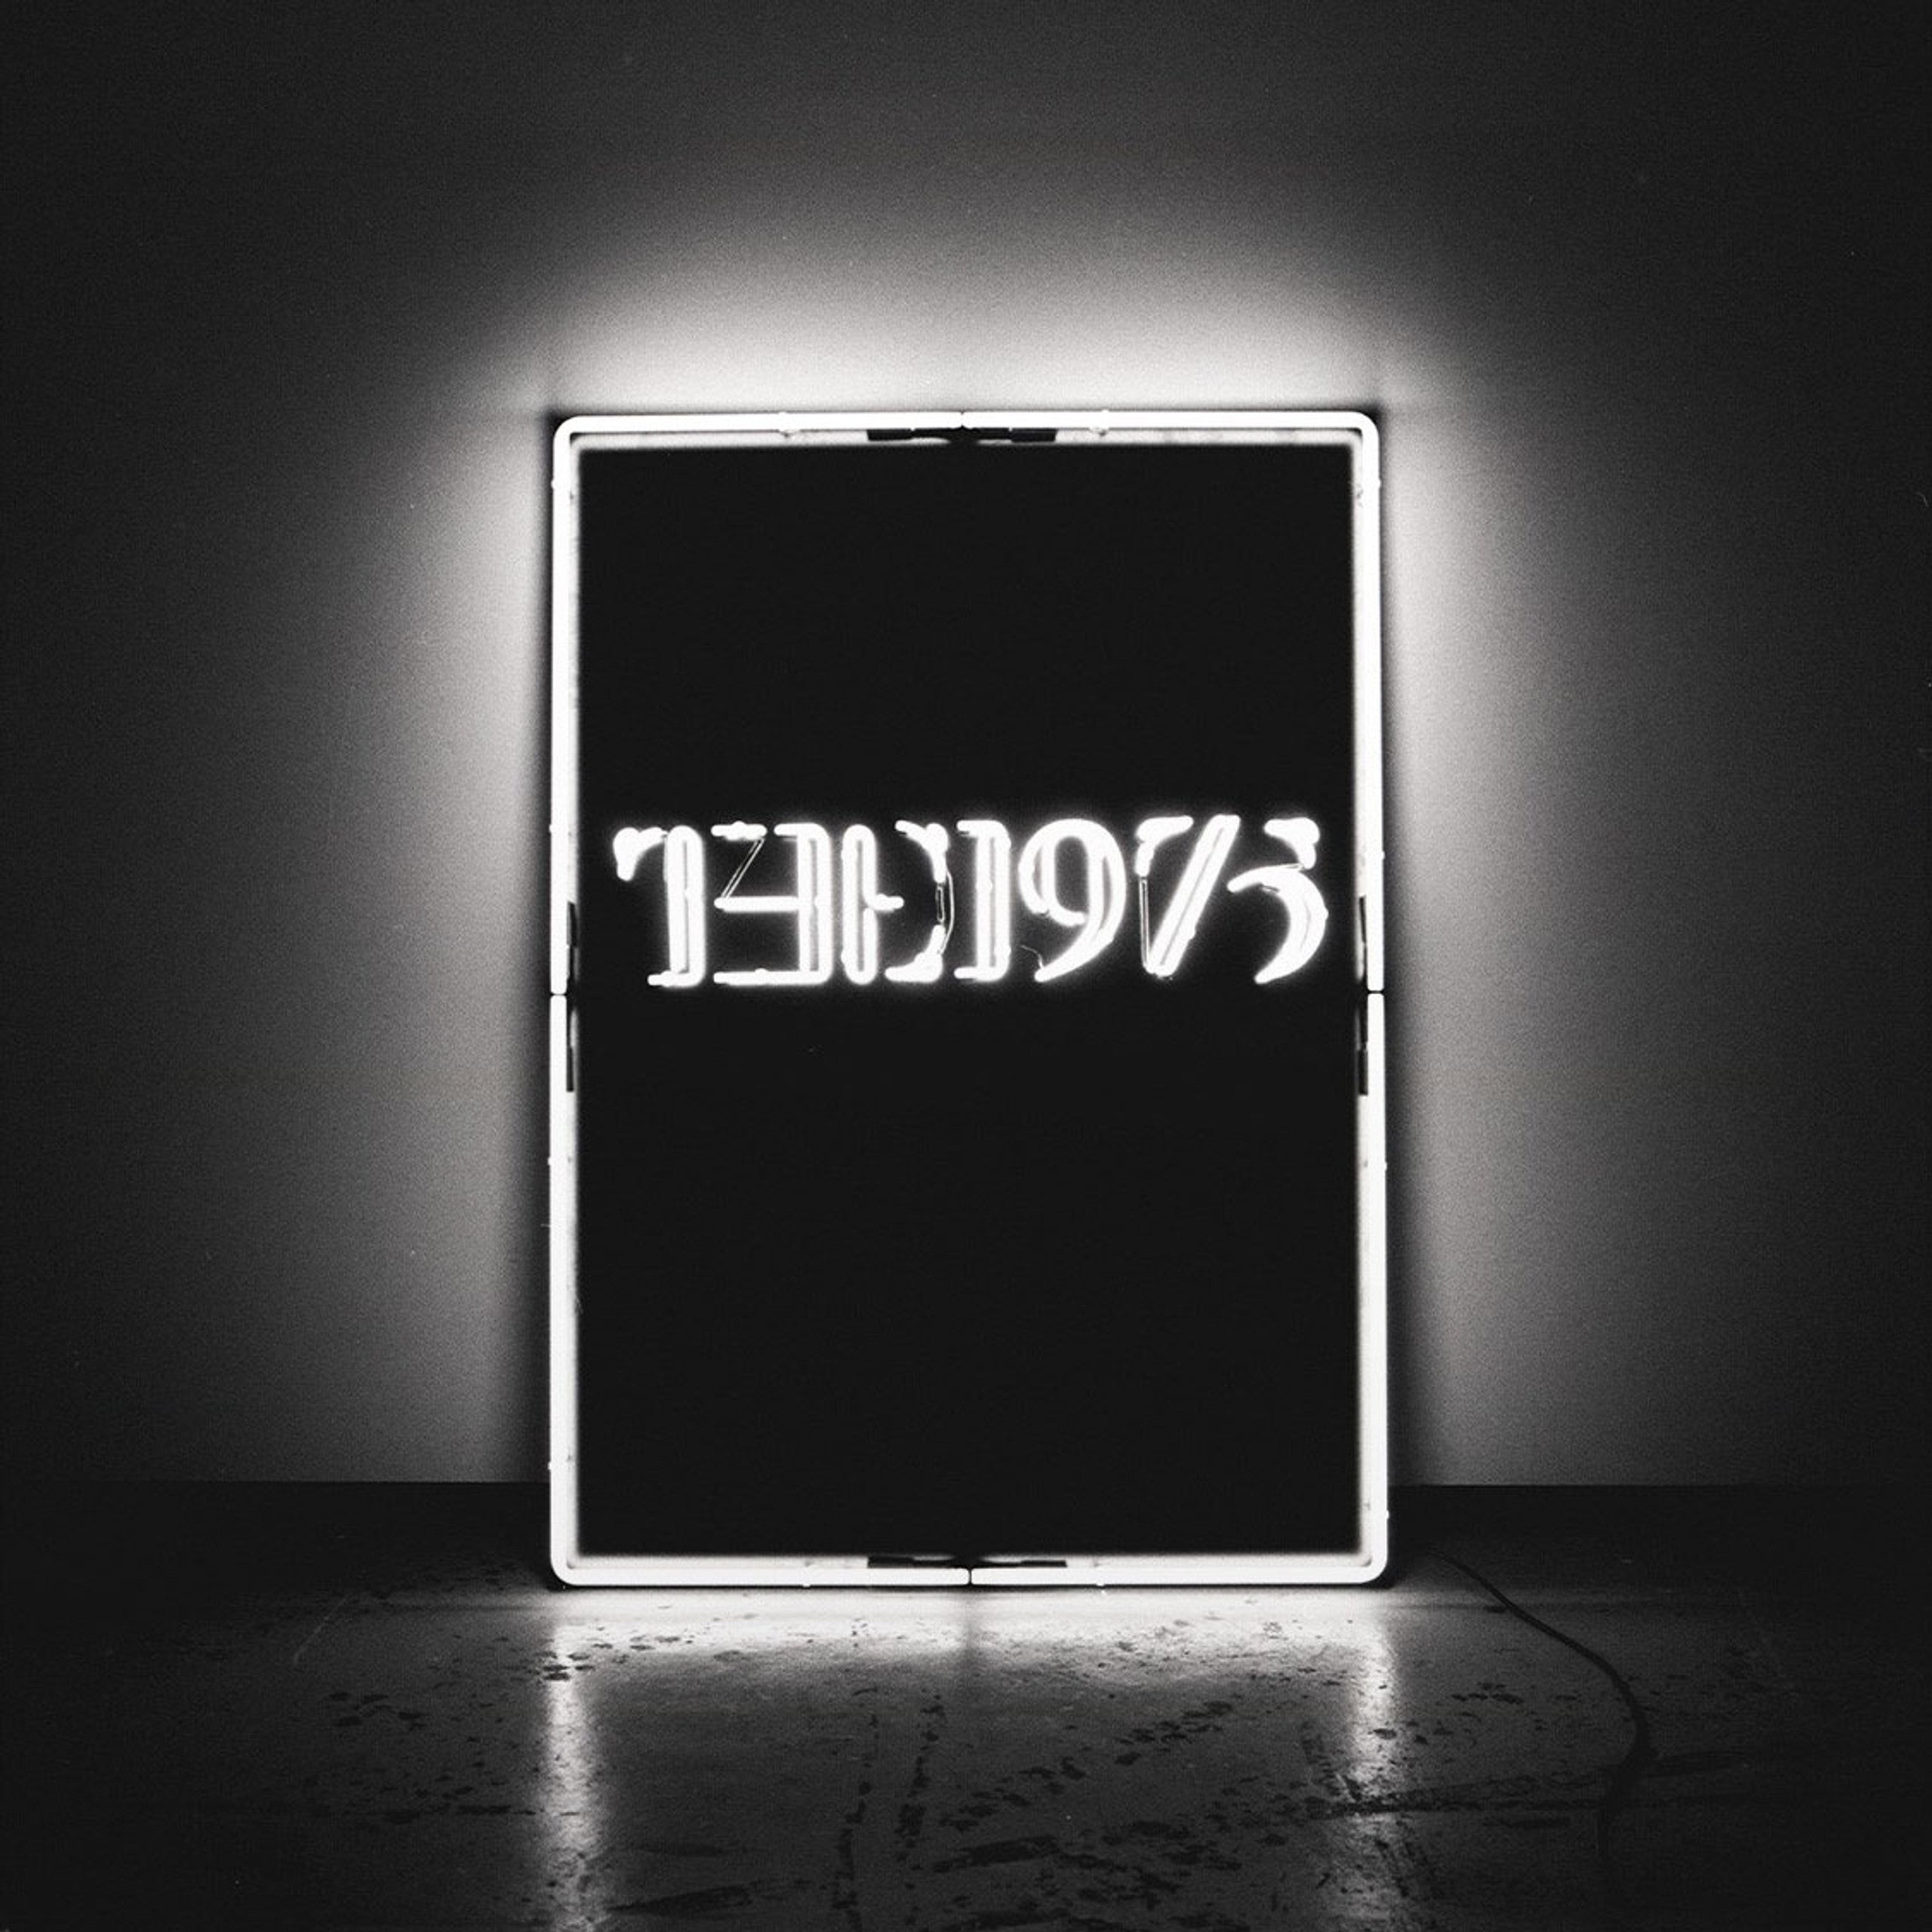 Order The 1975 - The 1975: 10th Anniversary Edition (Limited Edition 2xLP White Vinyl)